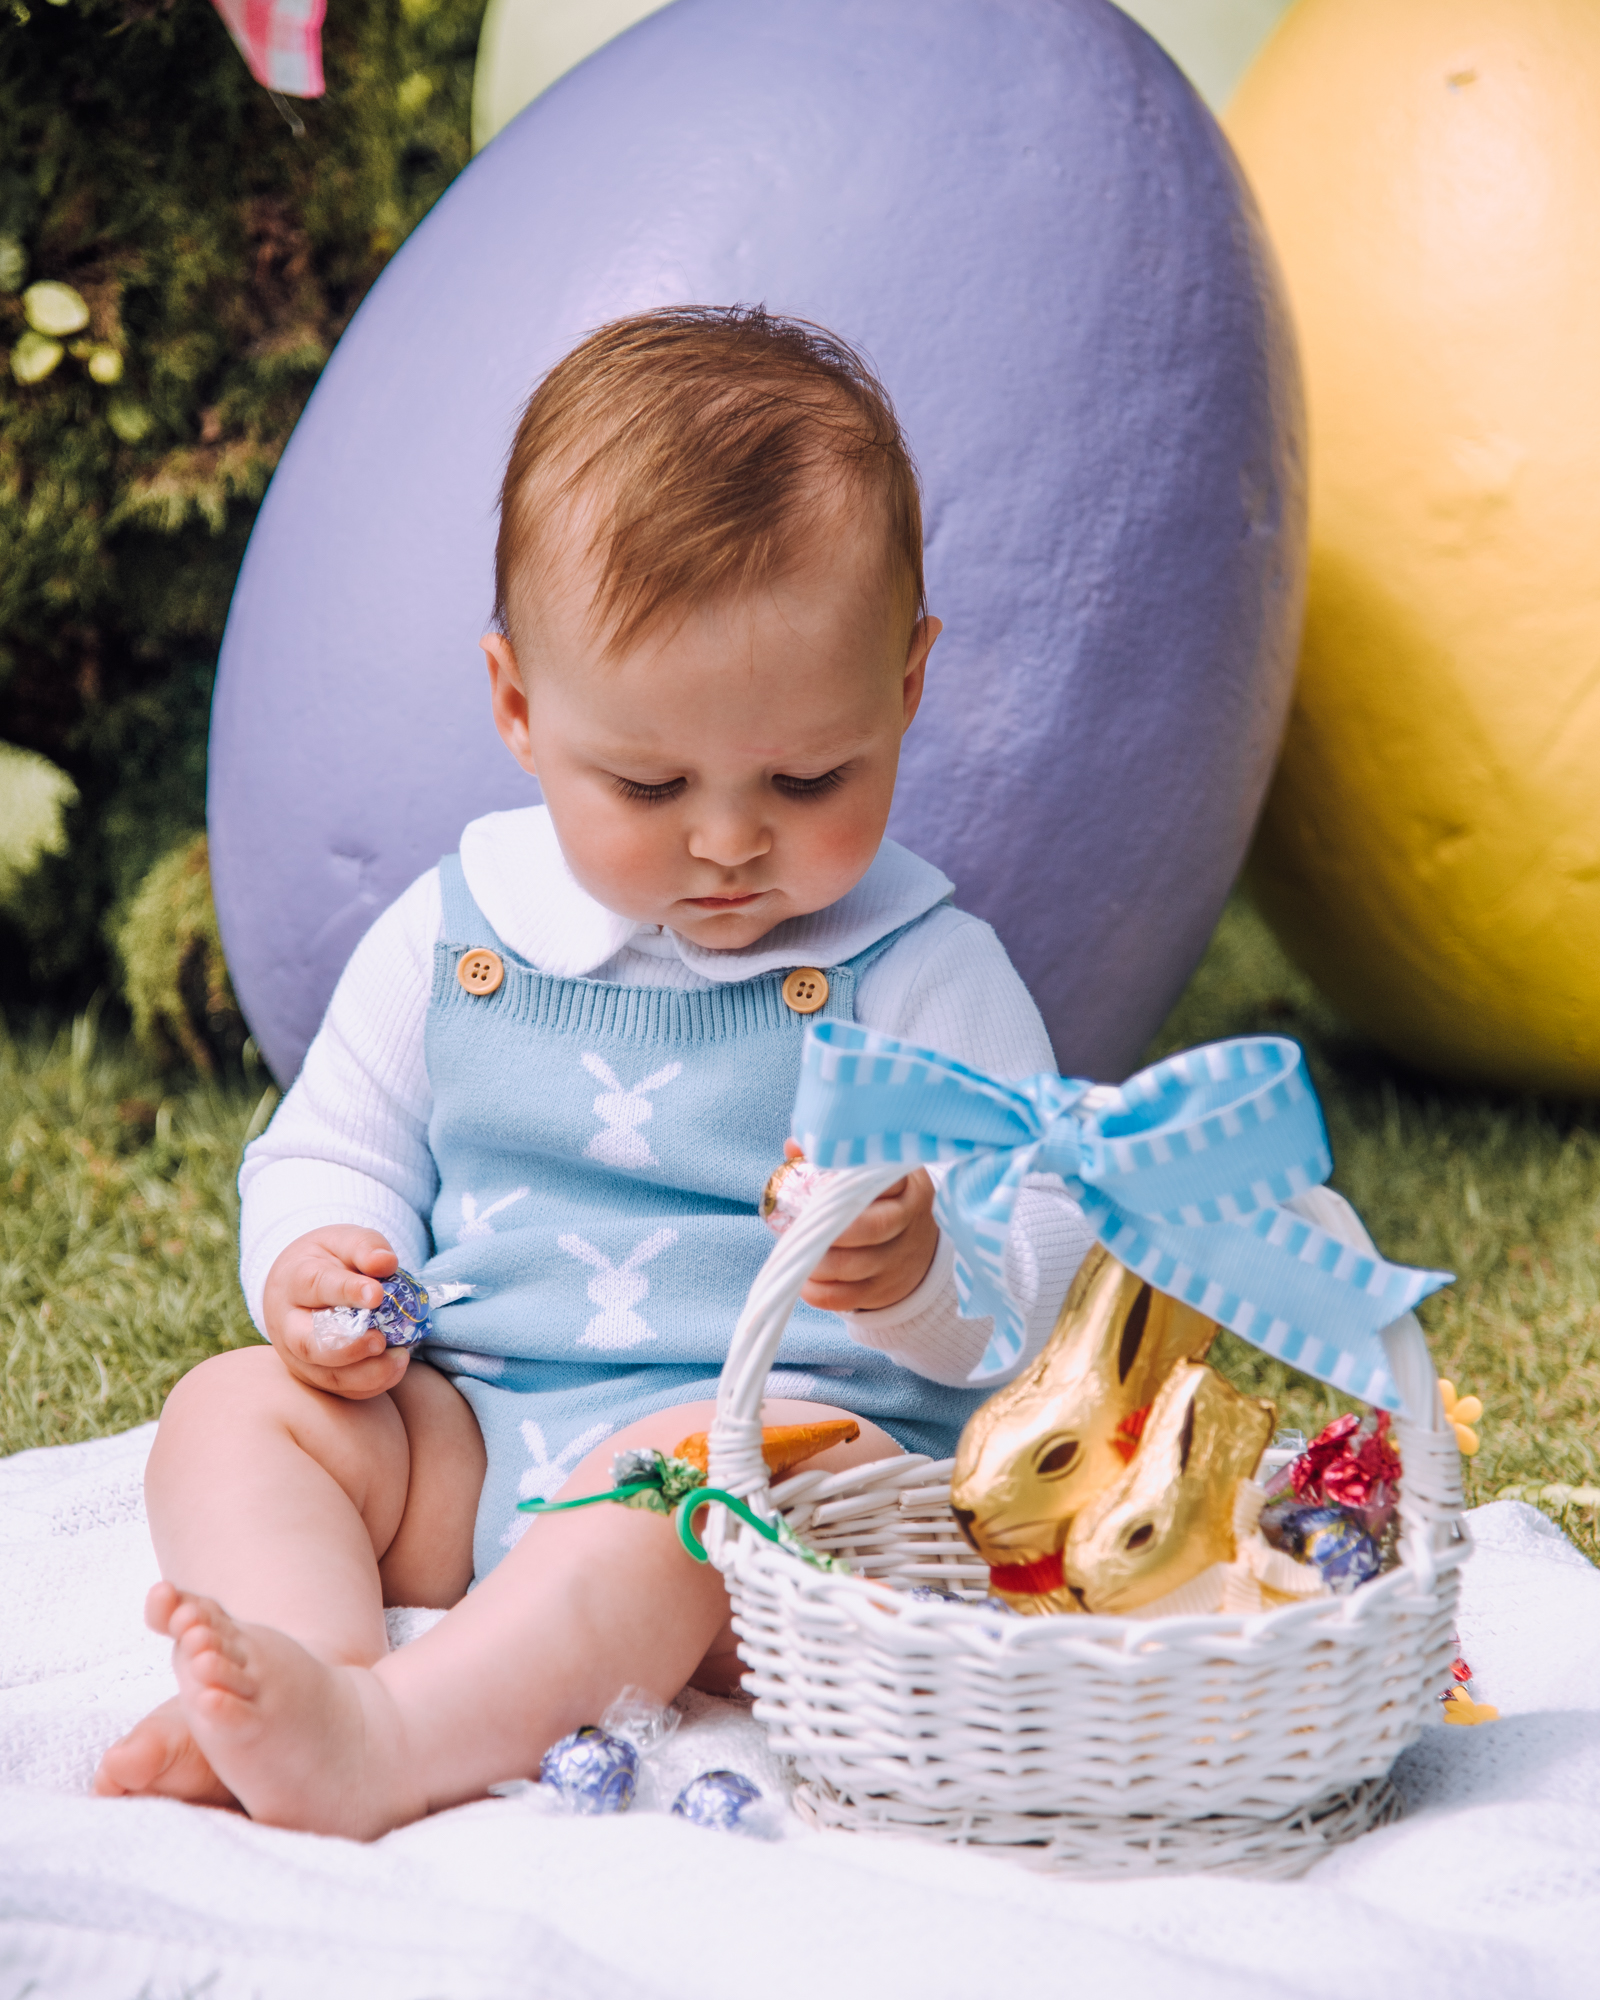 Spring Baby Photoshoot Ideas - Baby with an Easter Basket